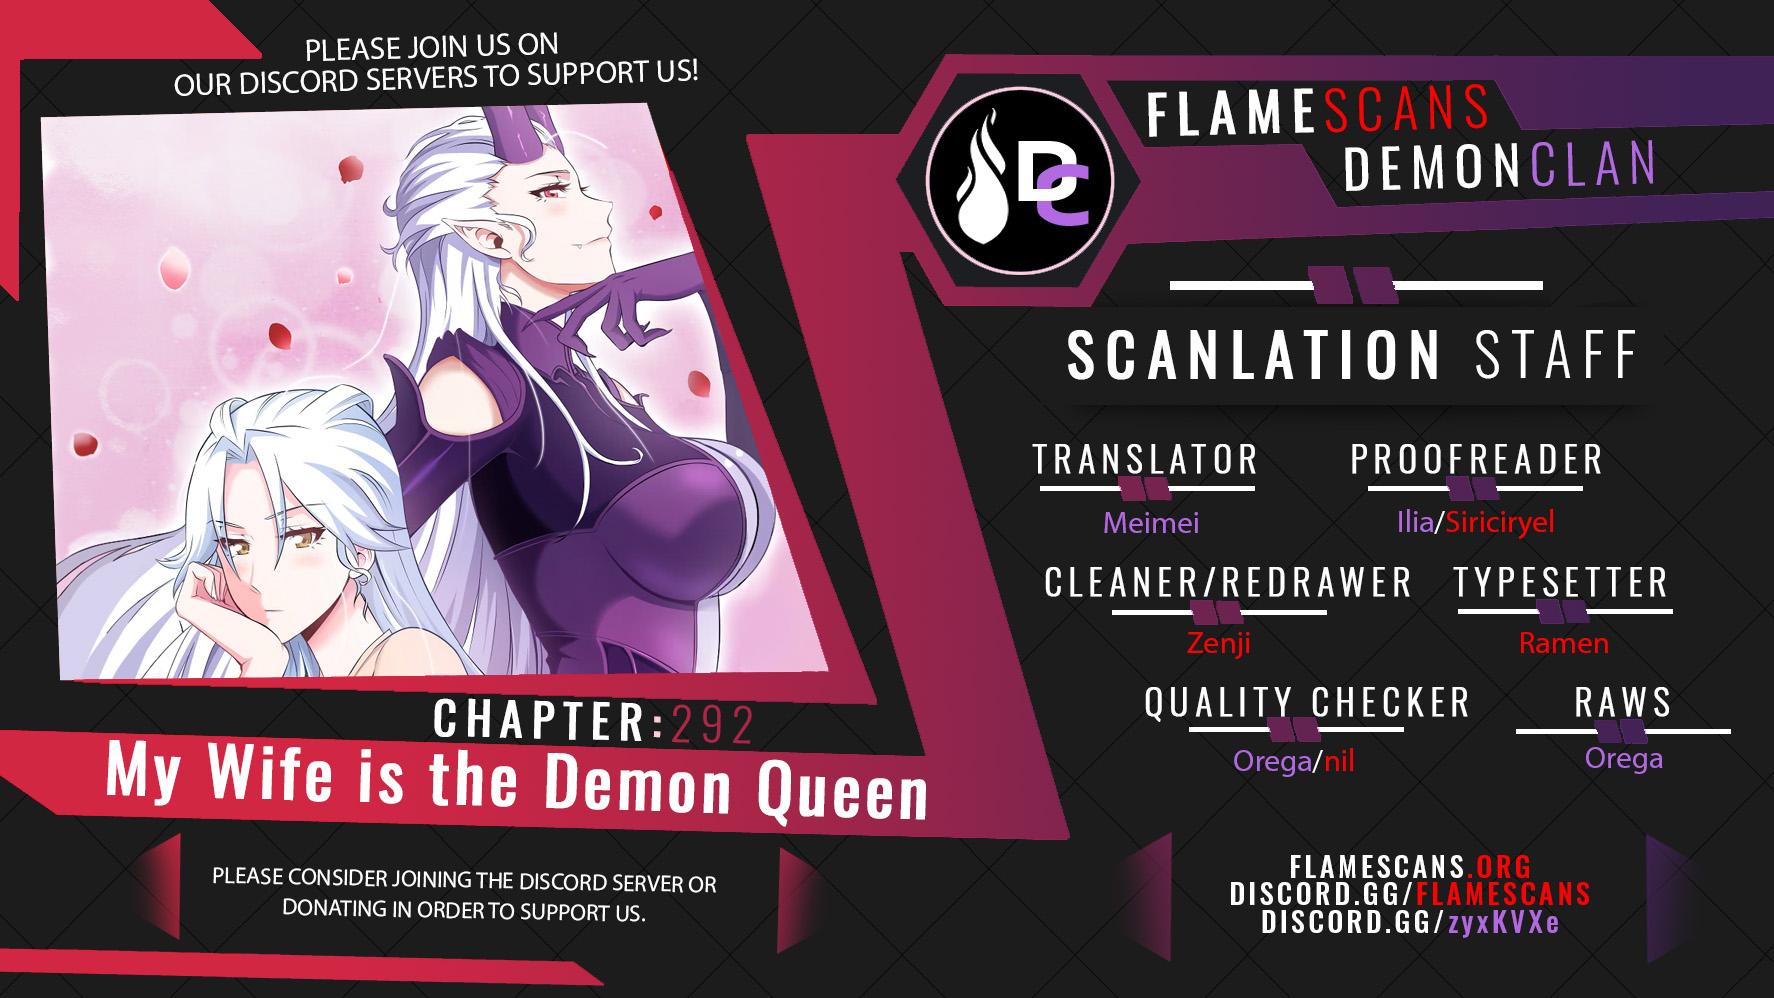 My Wife is a Demon Queen - Chapter 9783 - Image 1